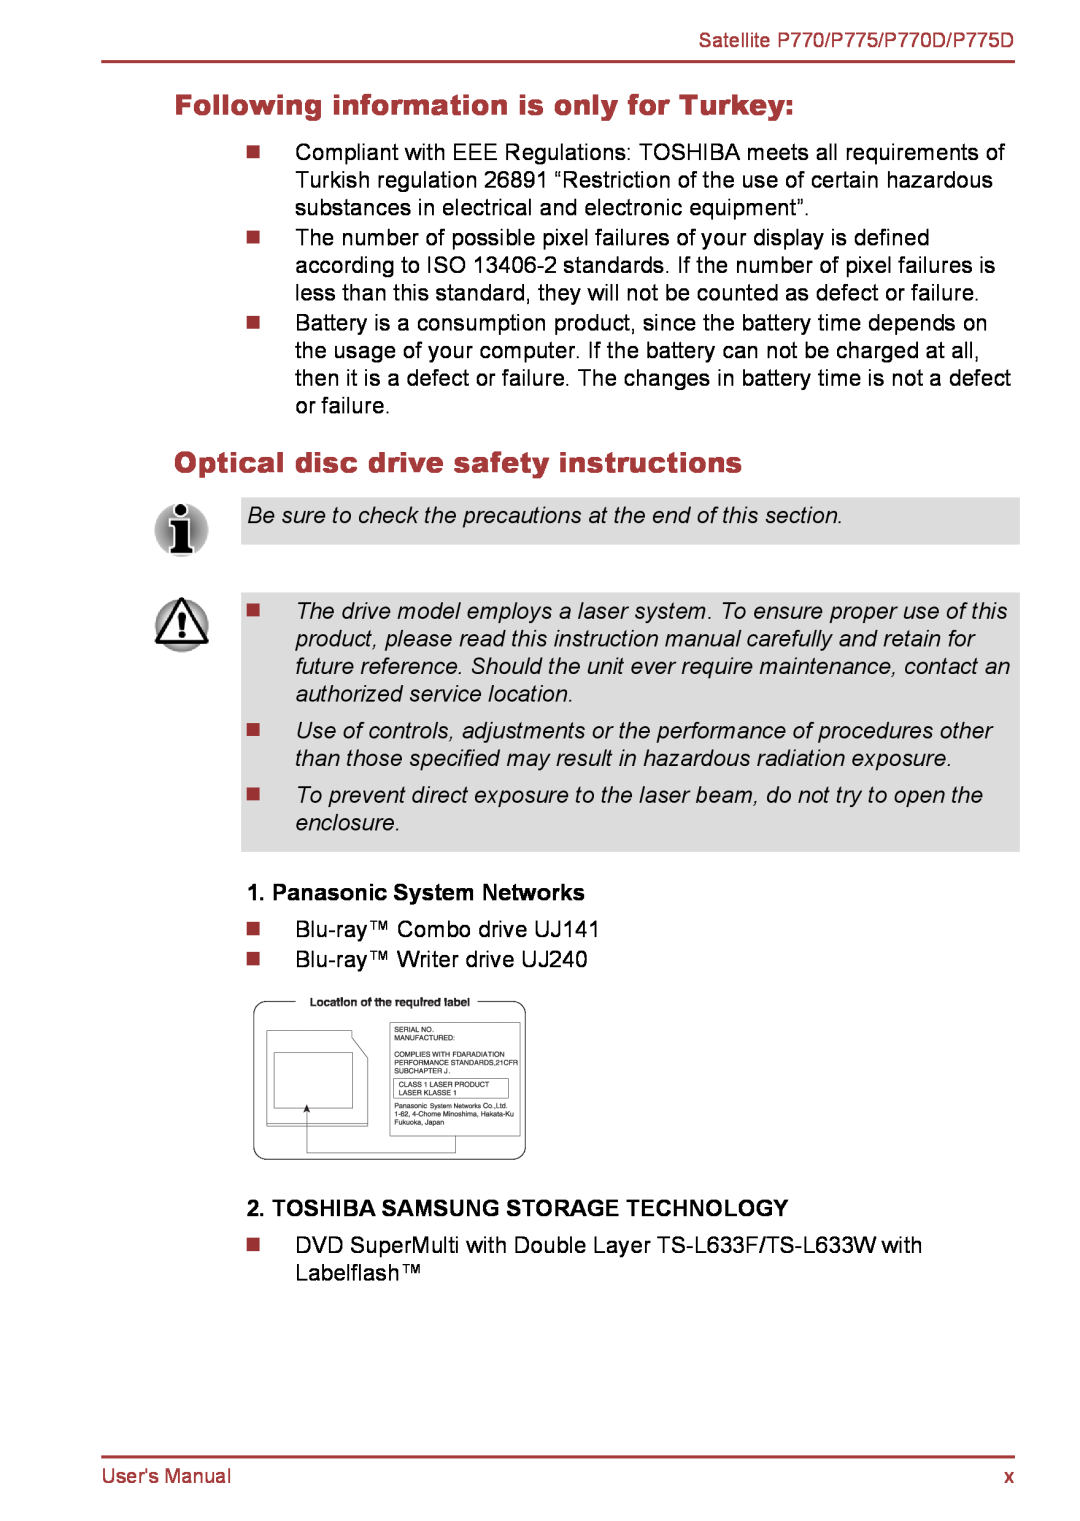 Toshiba P770 Following information is only for Turkey, Optical disc drive safety instructions, Panasonic System Networks 